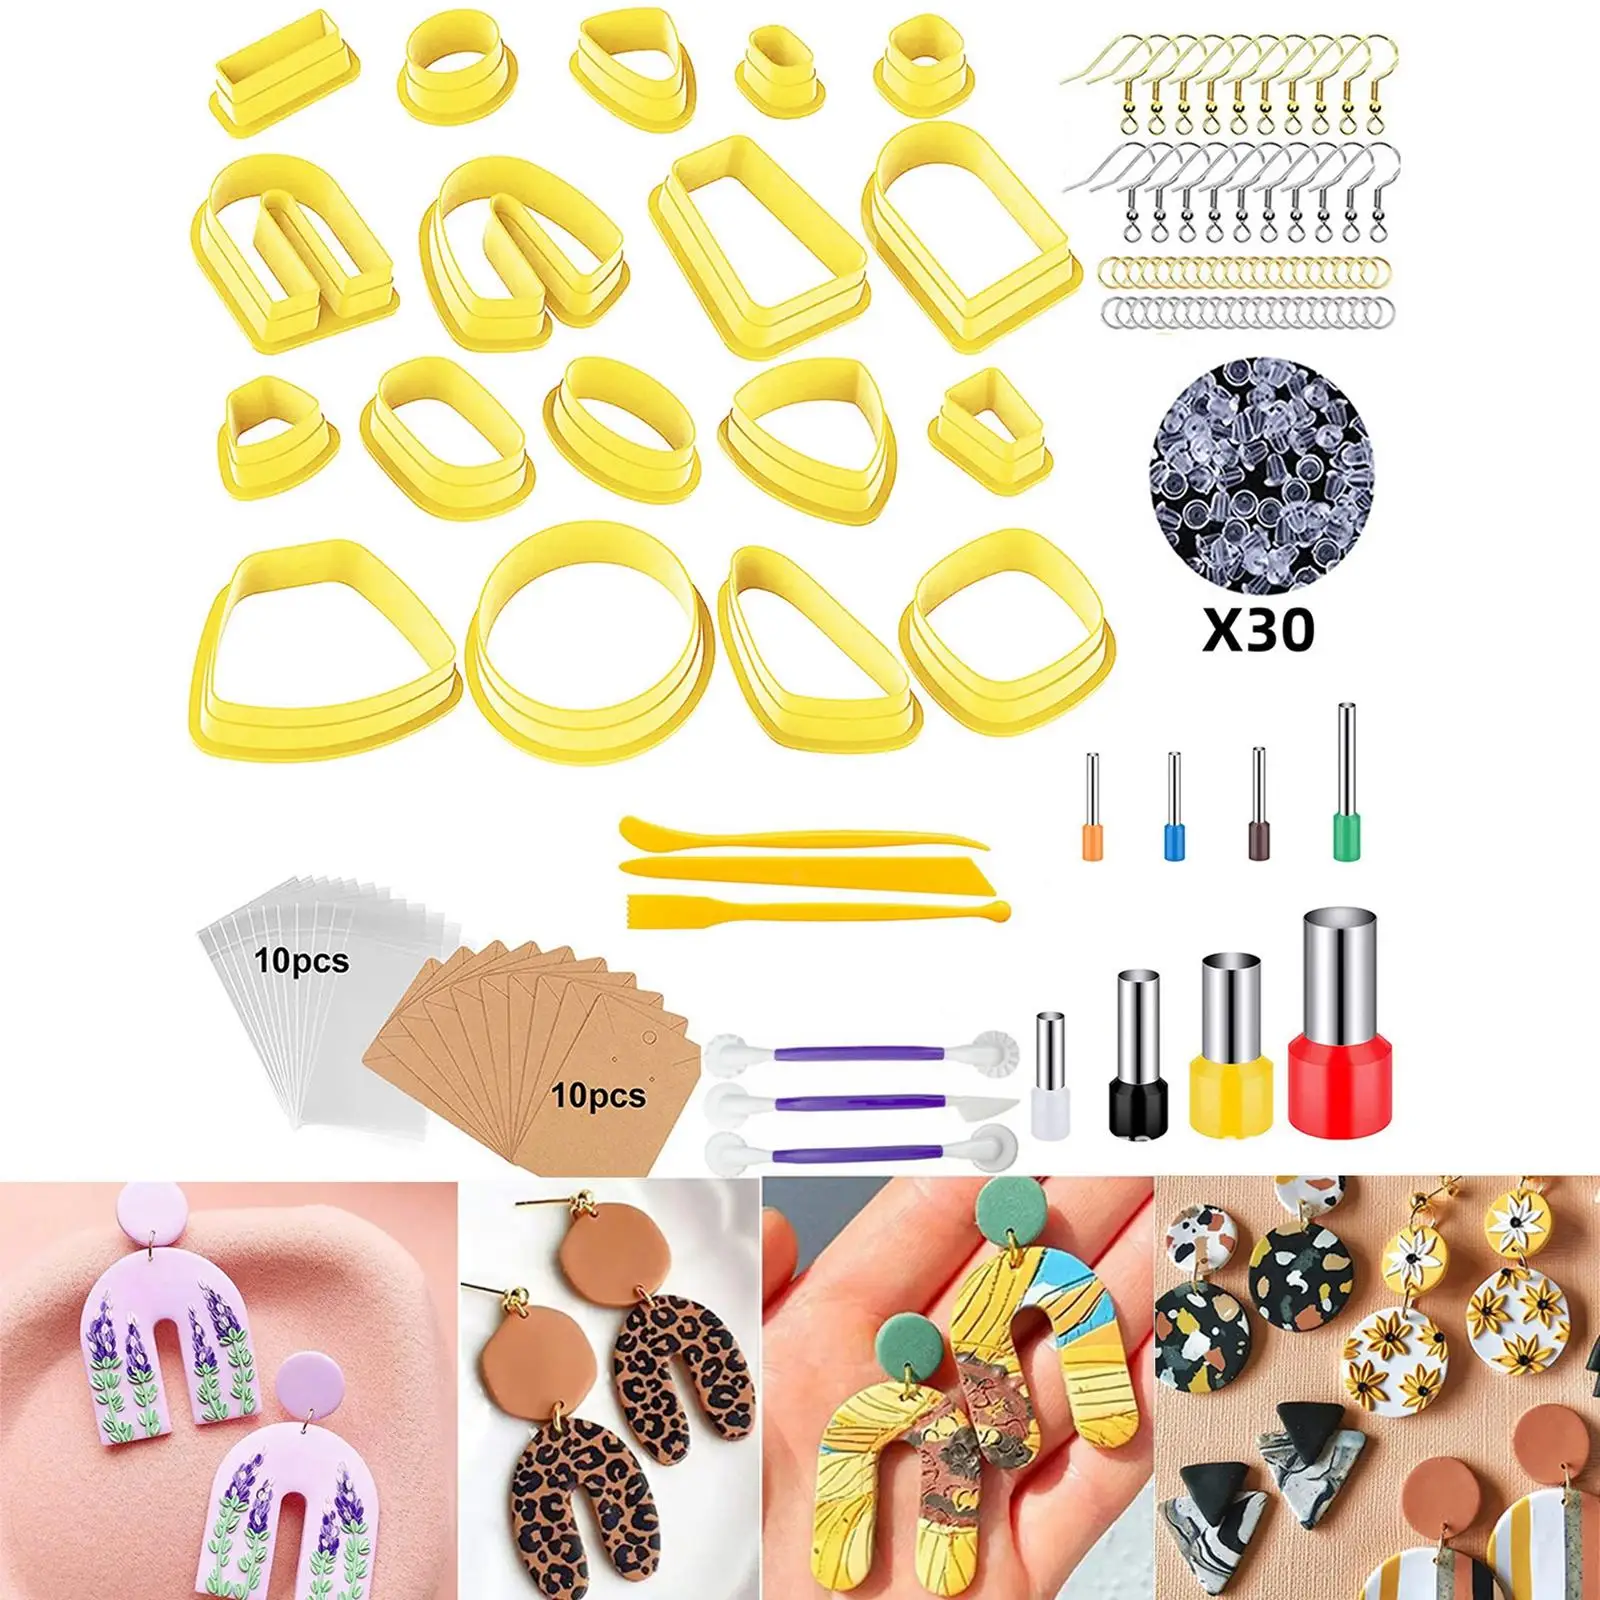 Polymer Clay , 18 Pcs Clay Earring with Earring Cards and Hooks, Tools, Earring Backs, Jump Rings for Clay Earring Making